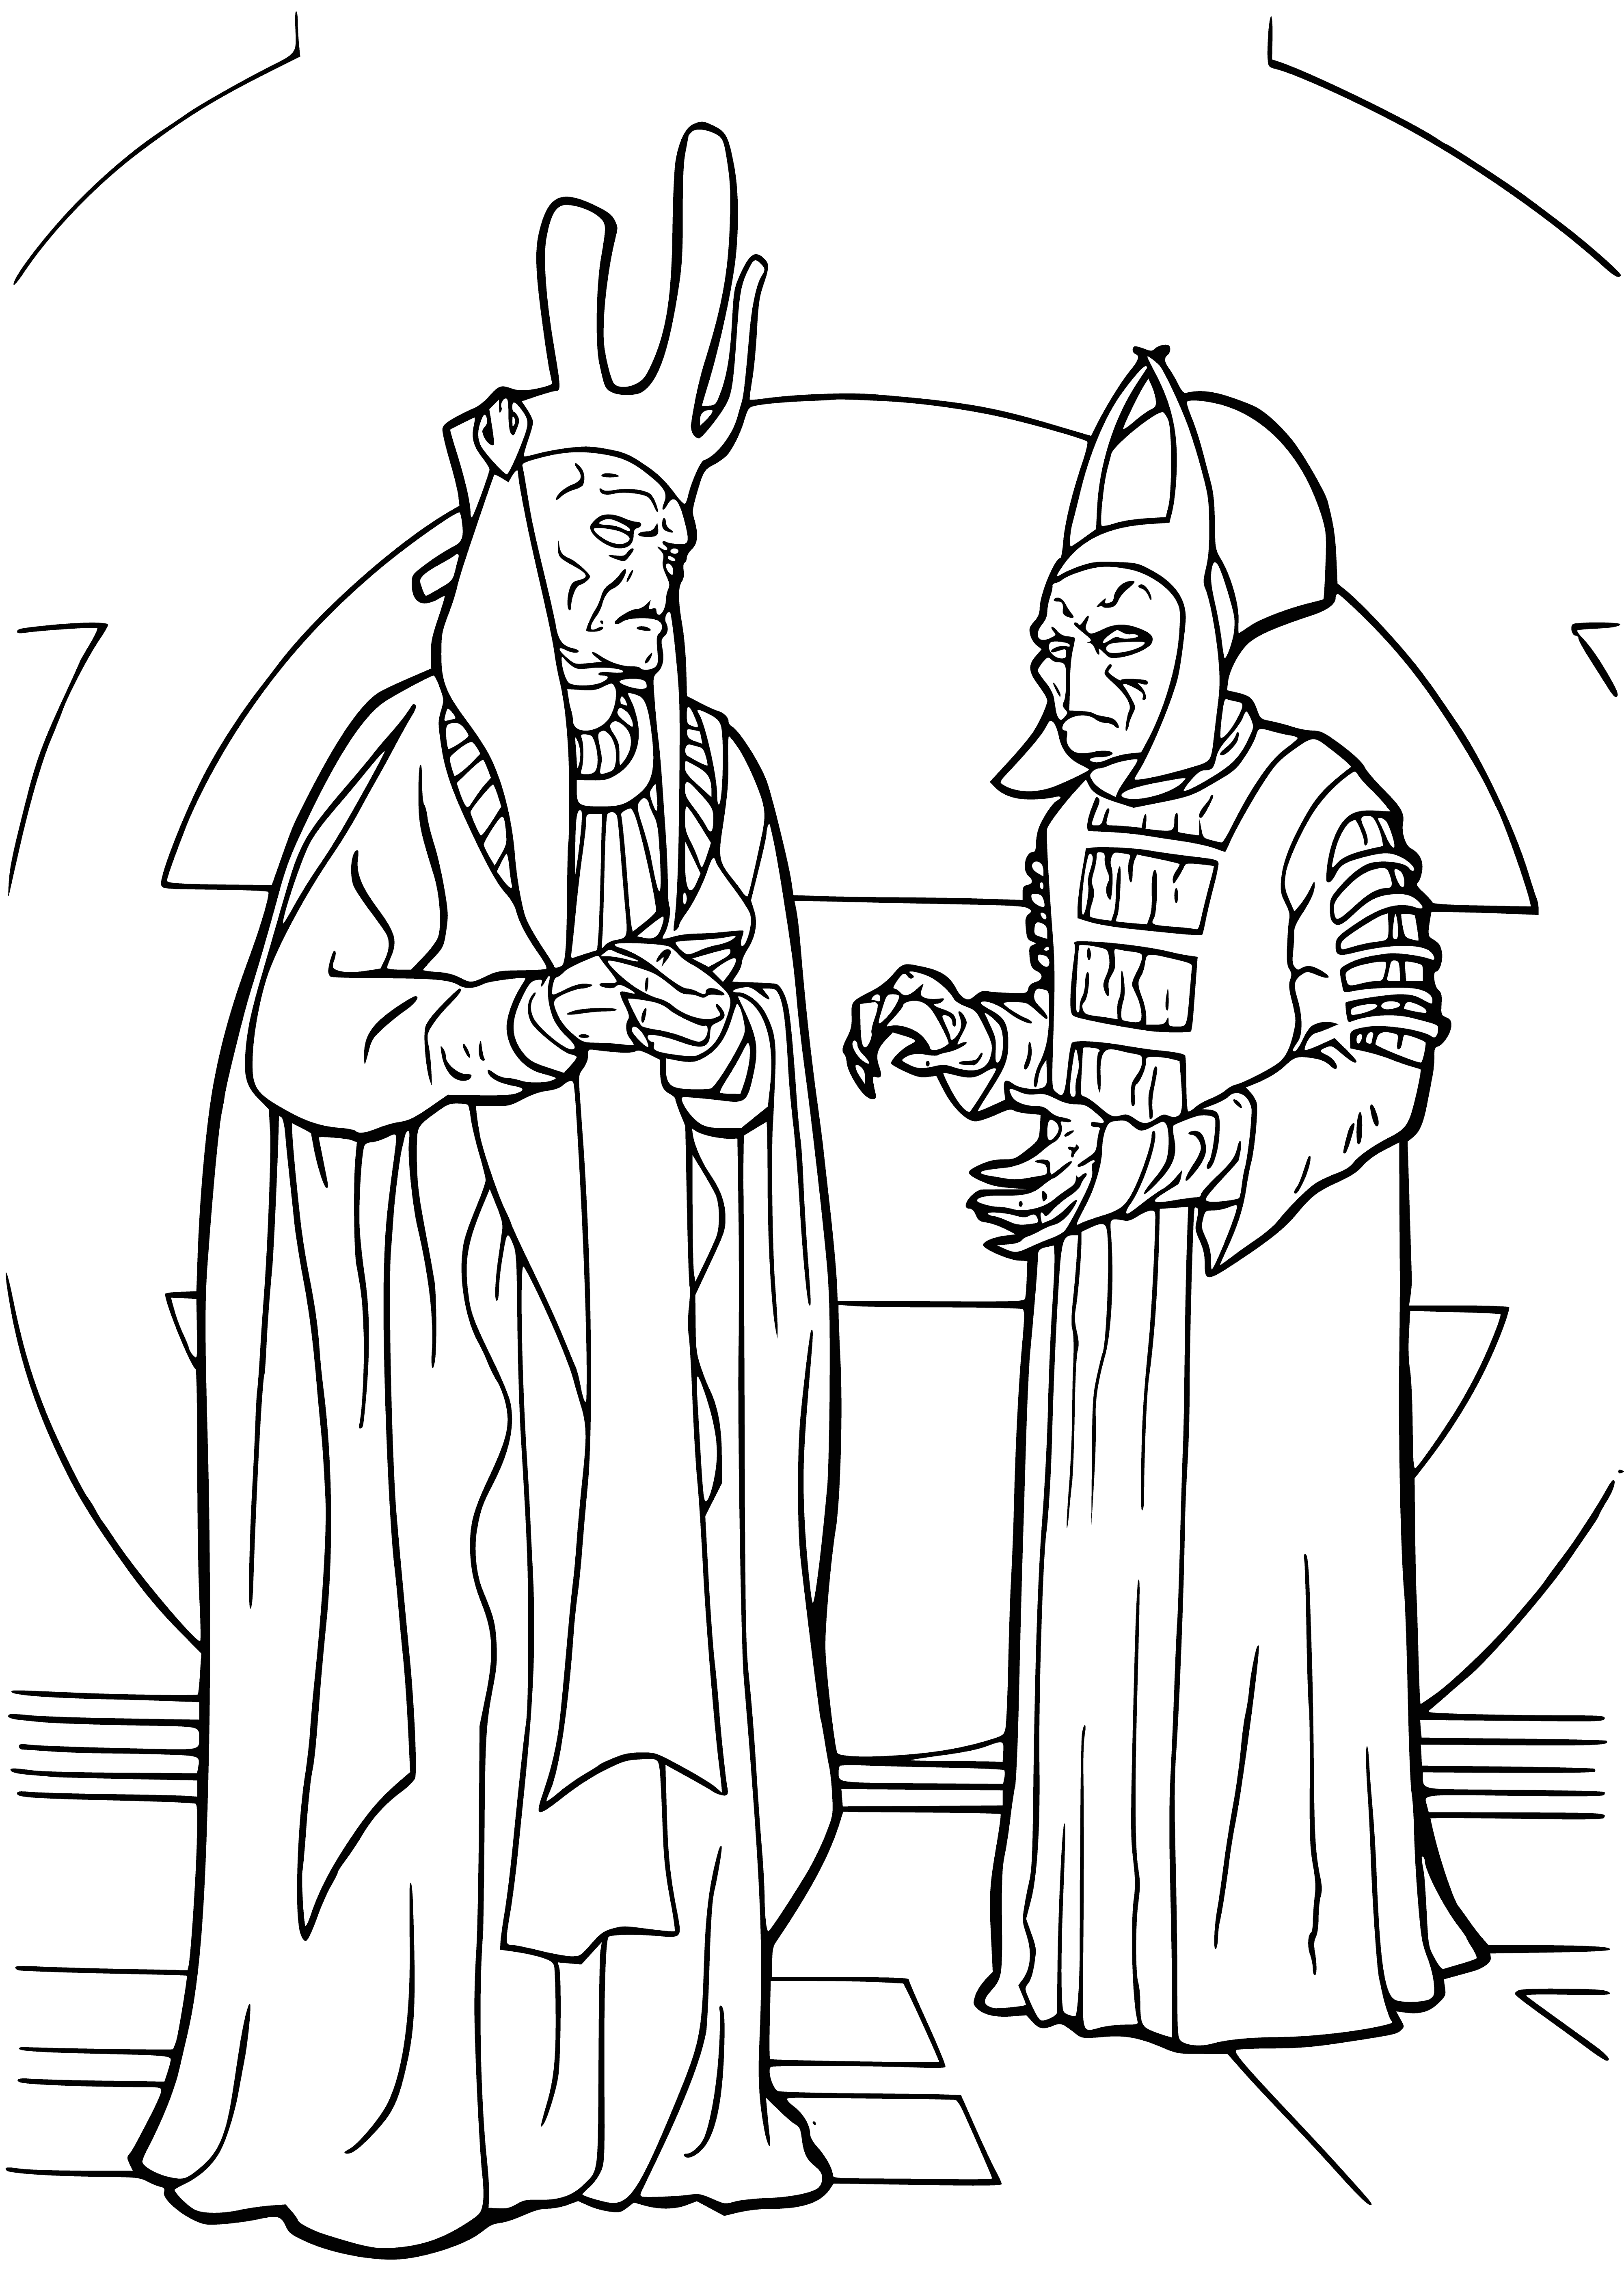 Head of the Trade Federation and his assistant coloring page